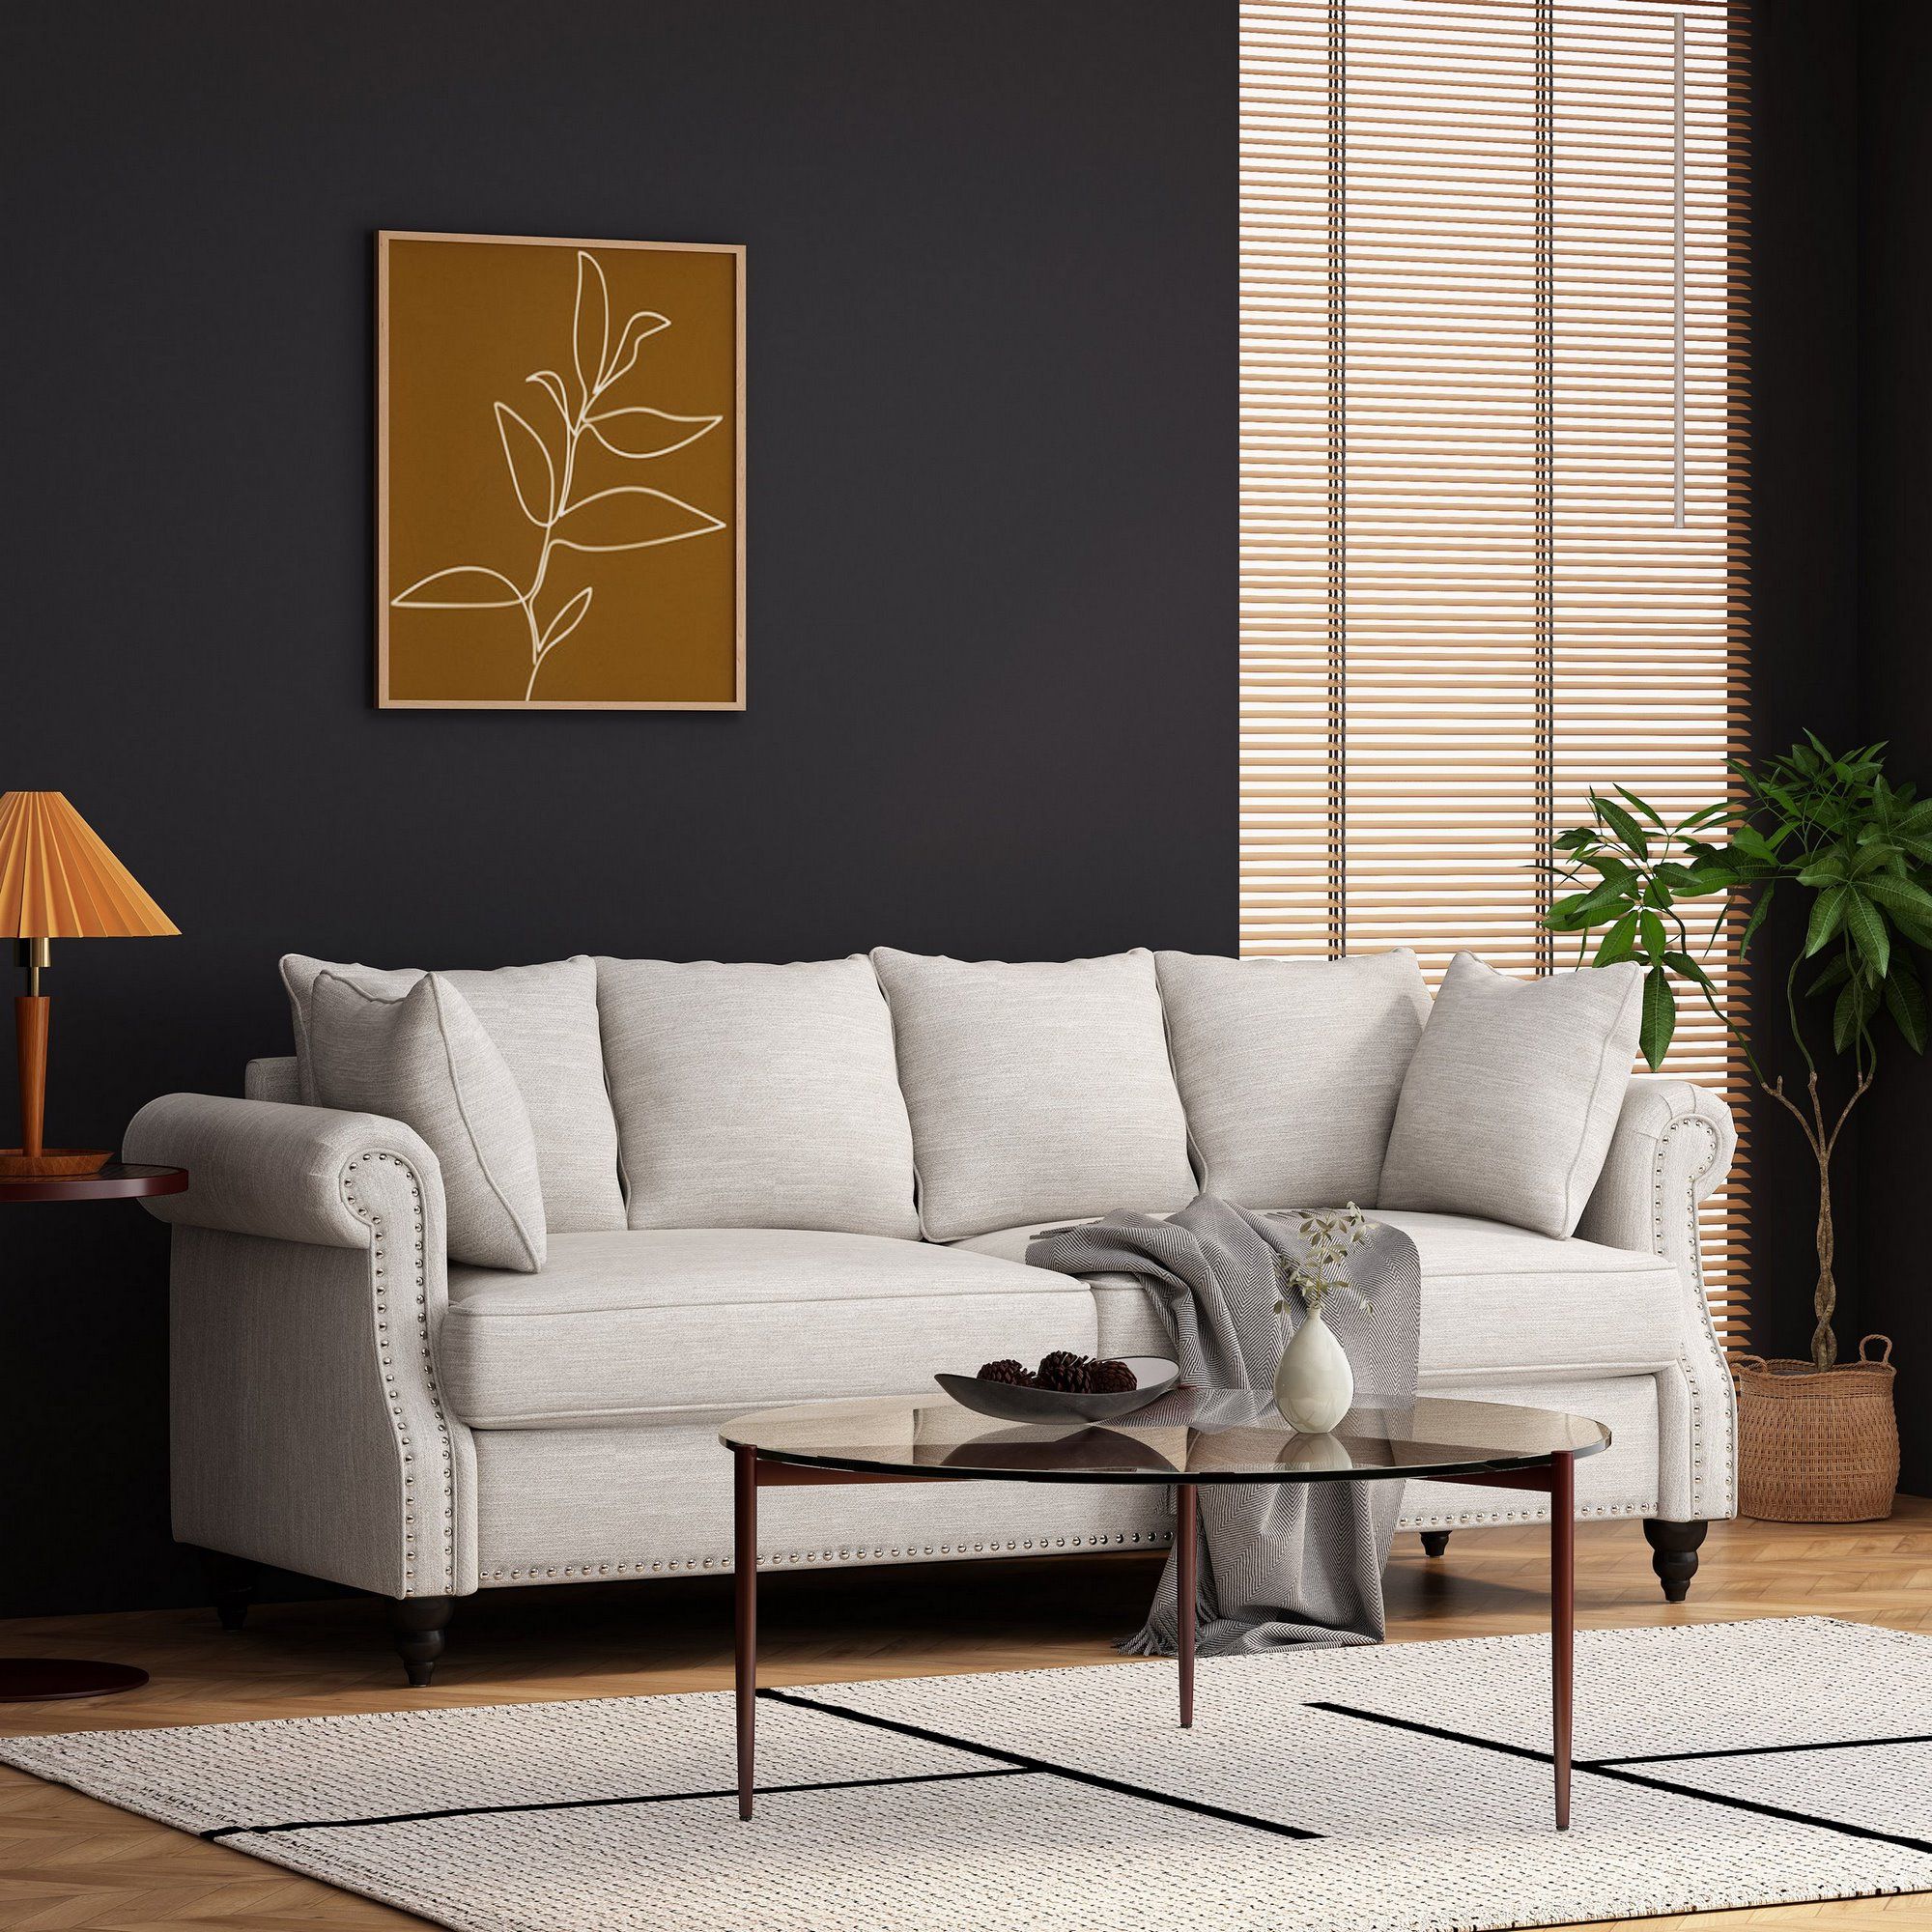 Manbow Contemporary Fabric Pillowback 3 Seater Sofa With Nailhead Trim,  Beige And Dark Brown Intended For Pillowback Sofa Sectionals (Gallery 8 of 20)